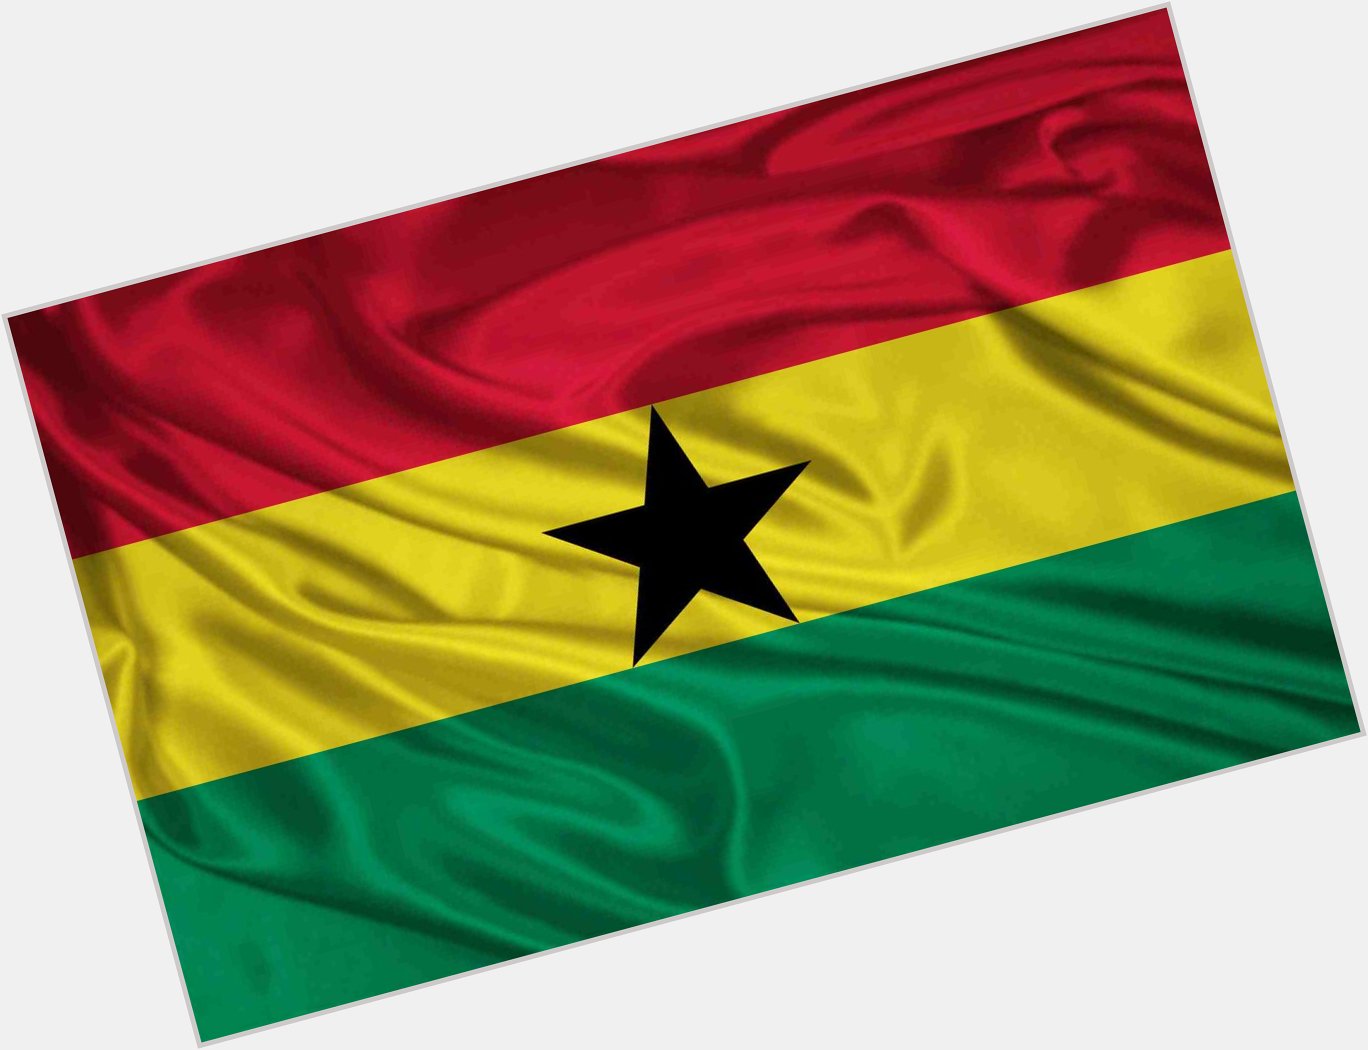 Happy birthday Ghana.  60 is not a common age for an African country. 